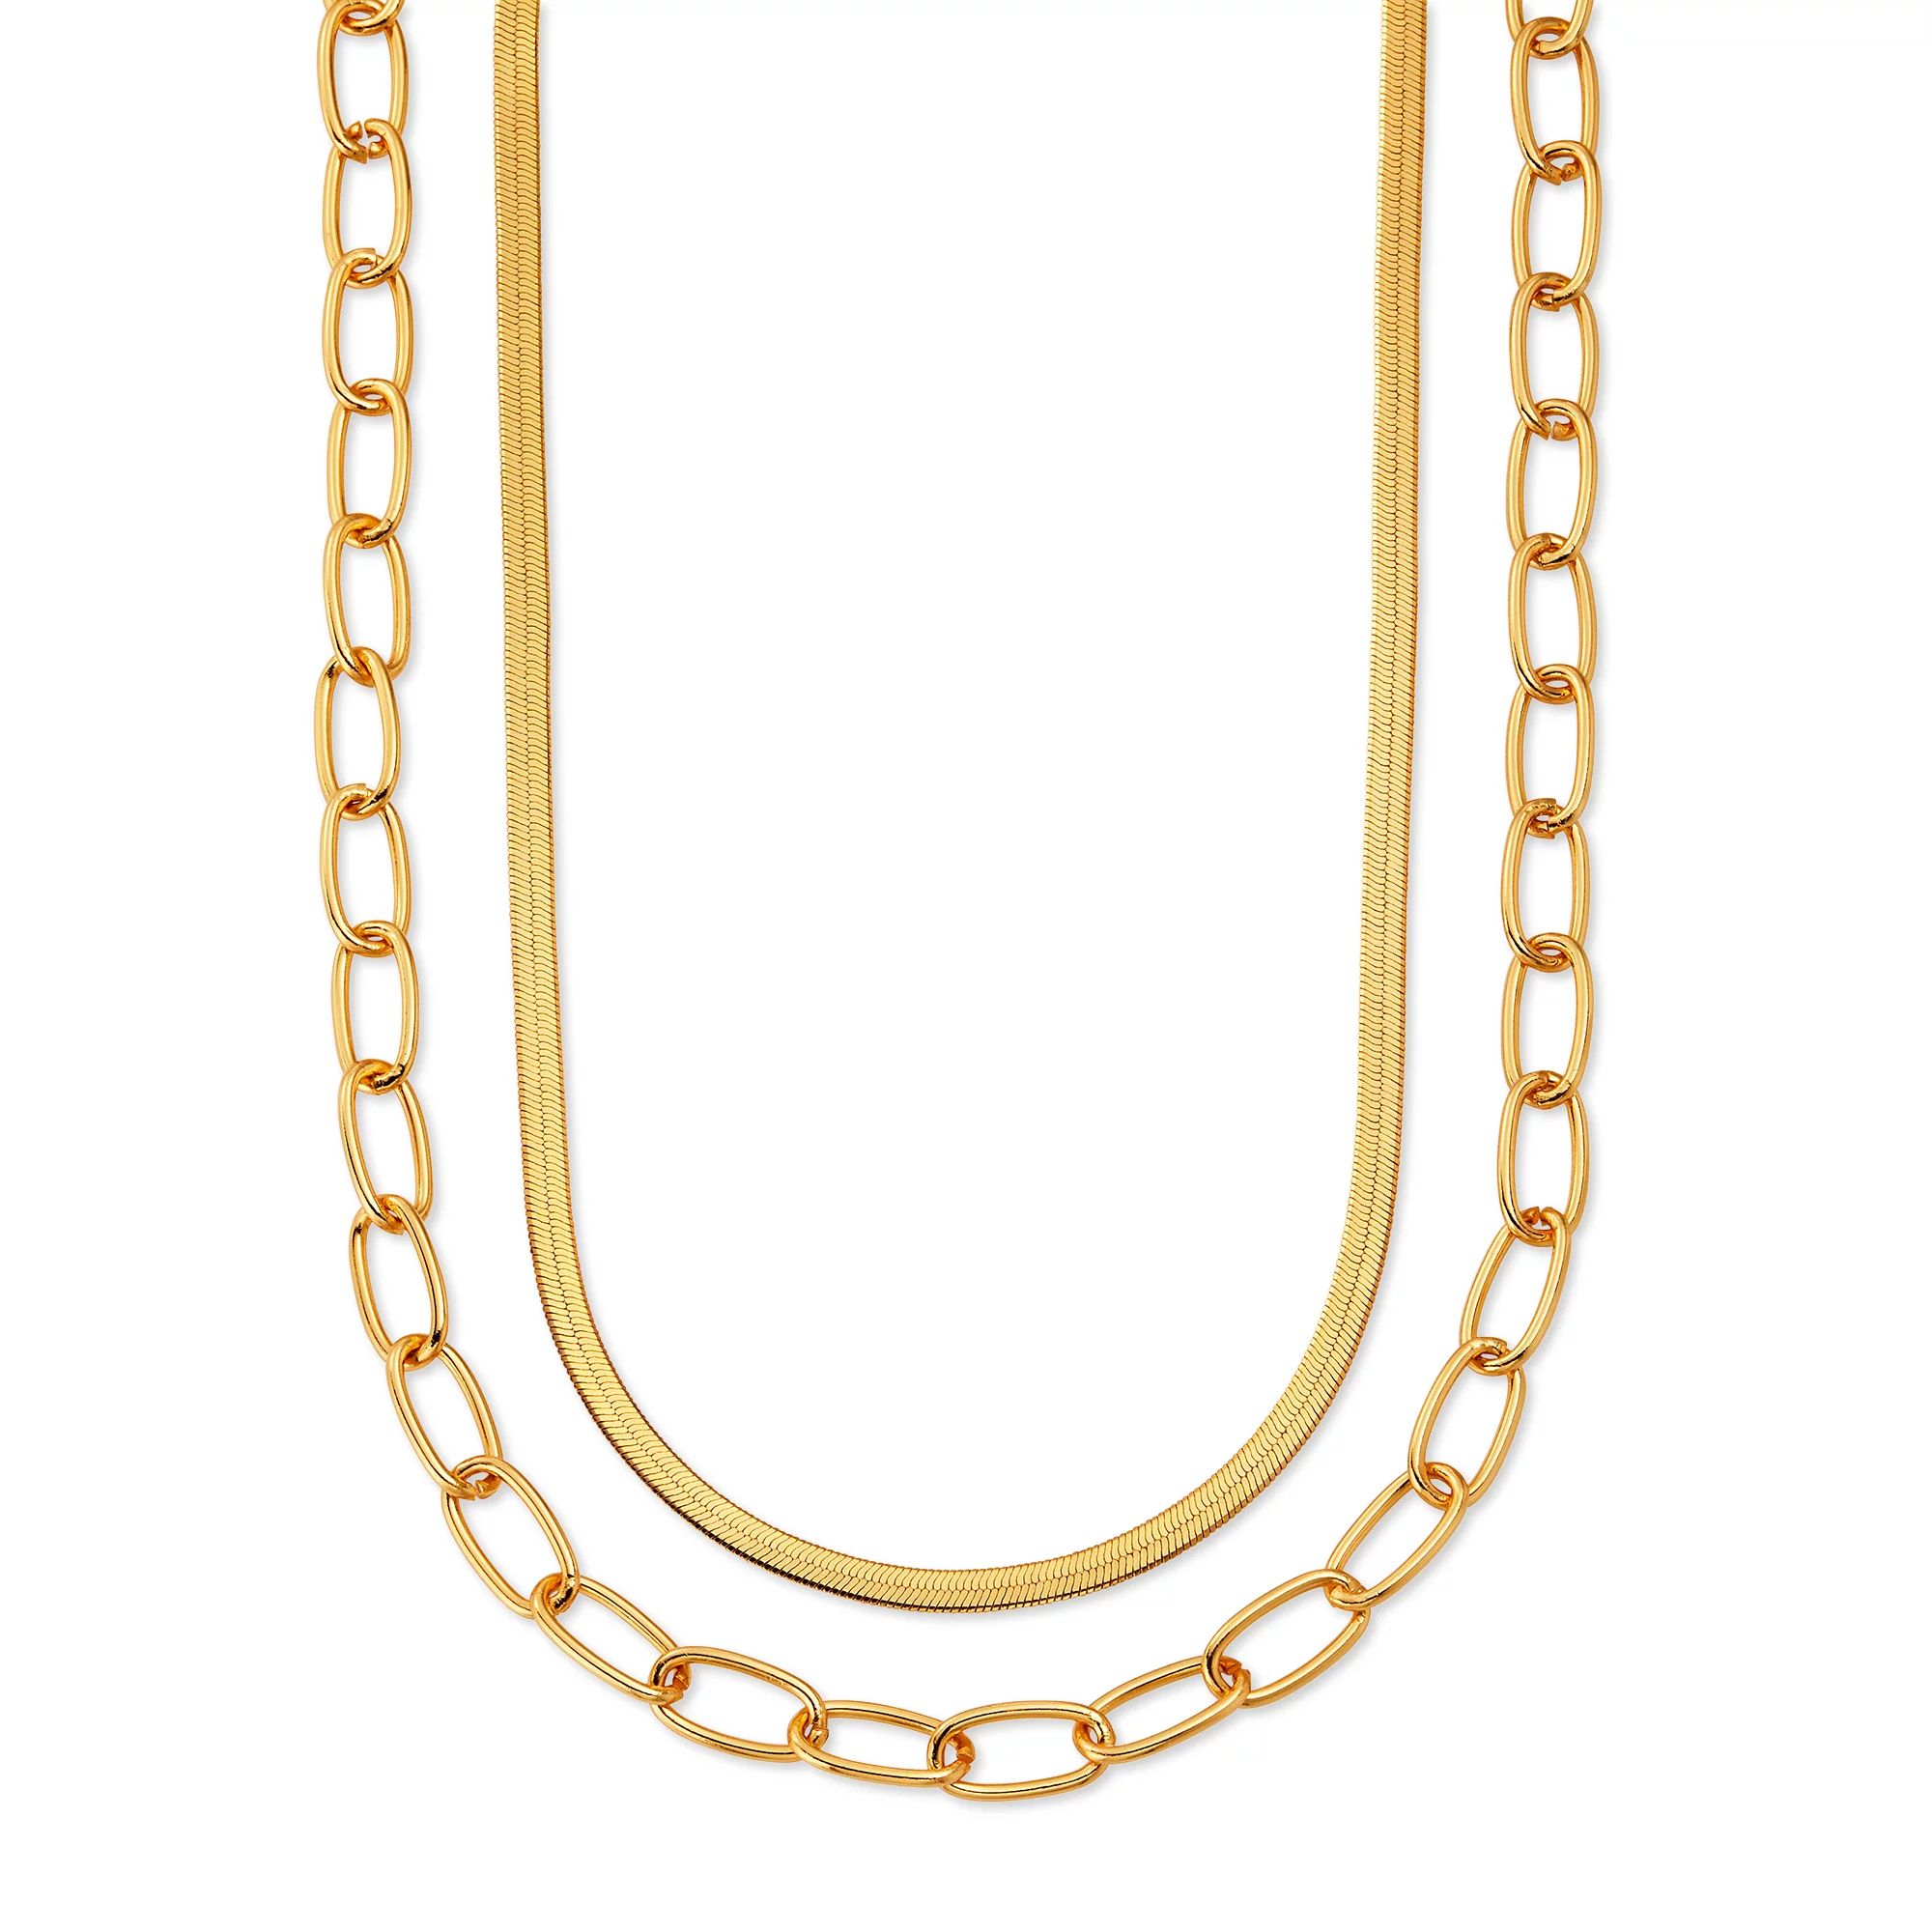 Scoop 14KT Gold Flash Plated Brass Layered Herringbone and Link Chain Necklace, 15" + 3" Extender | Walmart (US)